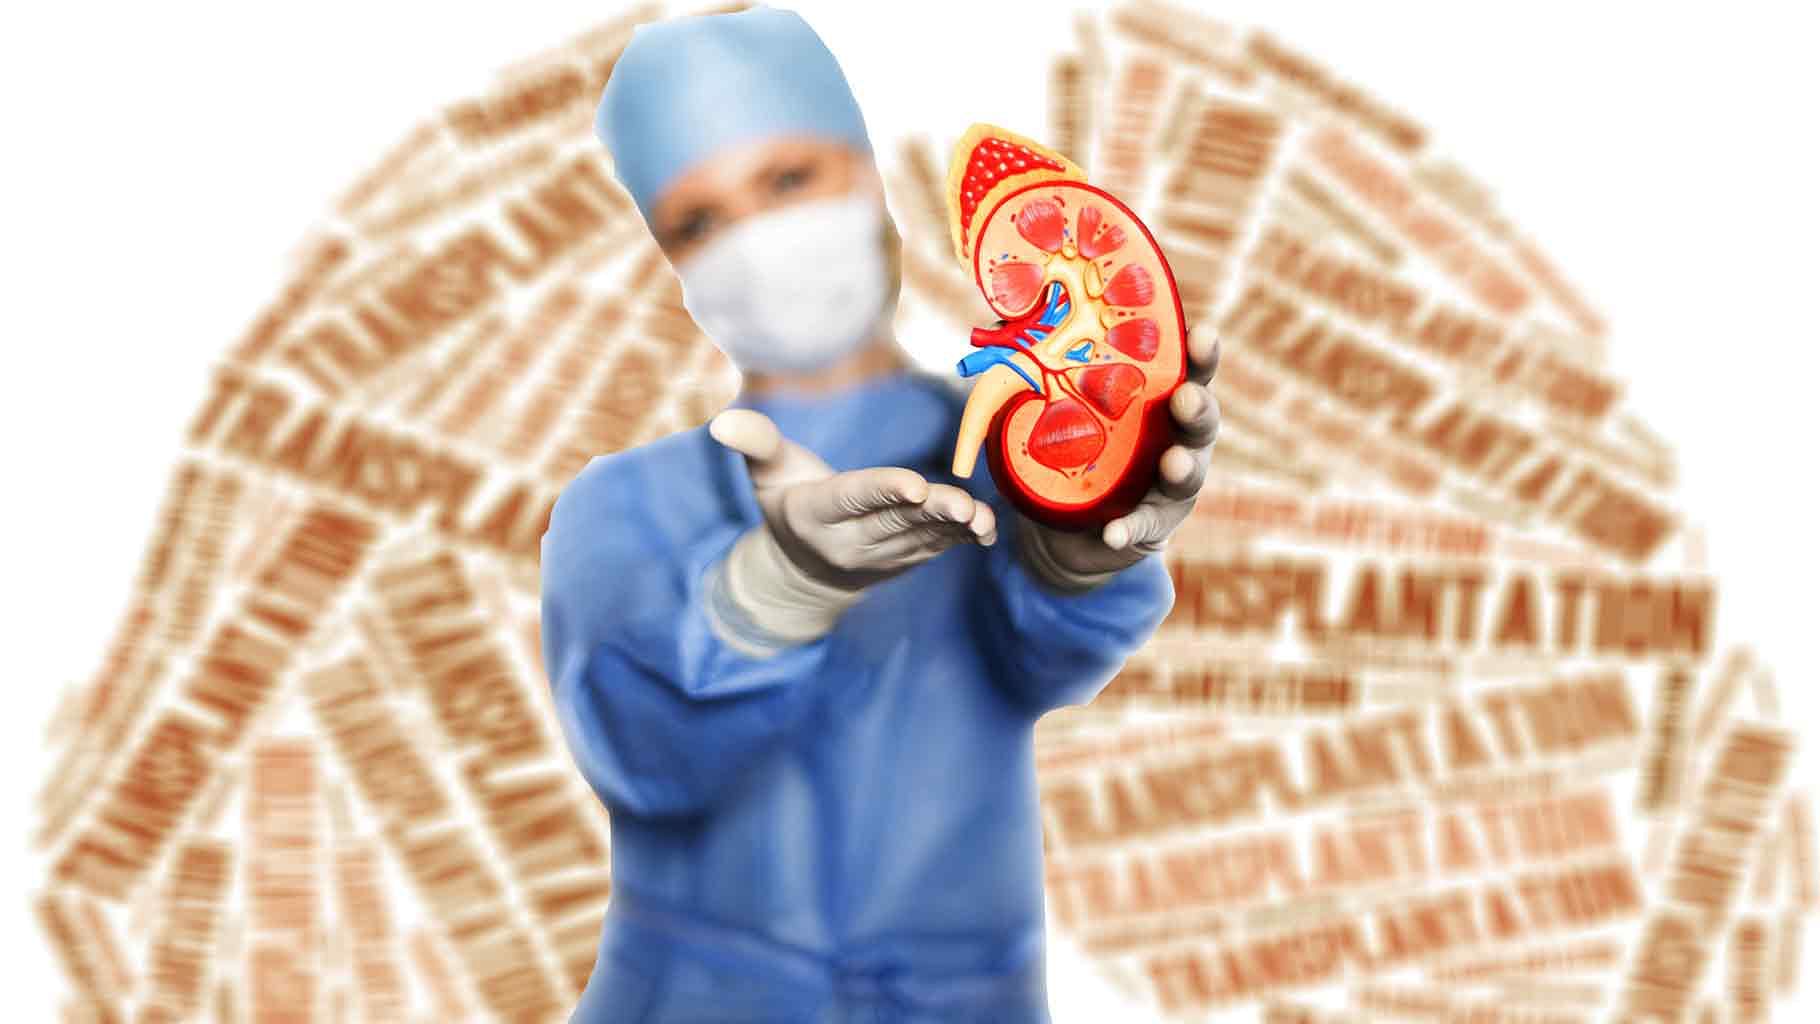 The stunning procedure to alter immune systems to accept kidneys from an incompatible match could potentially save millions of lives and cut transplant waiting times for millions more (Photo: iStock altered by The Quint) 